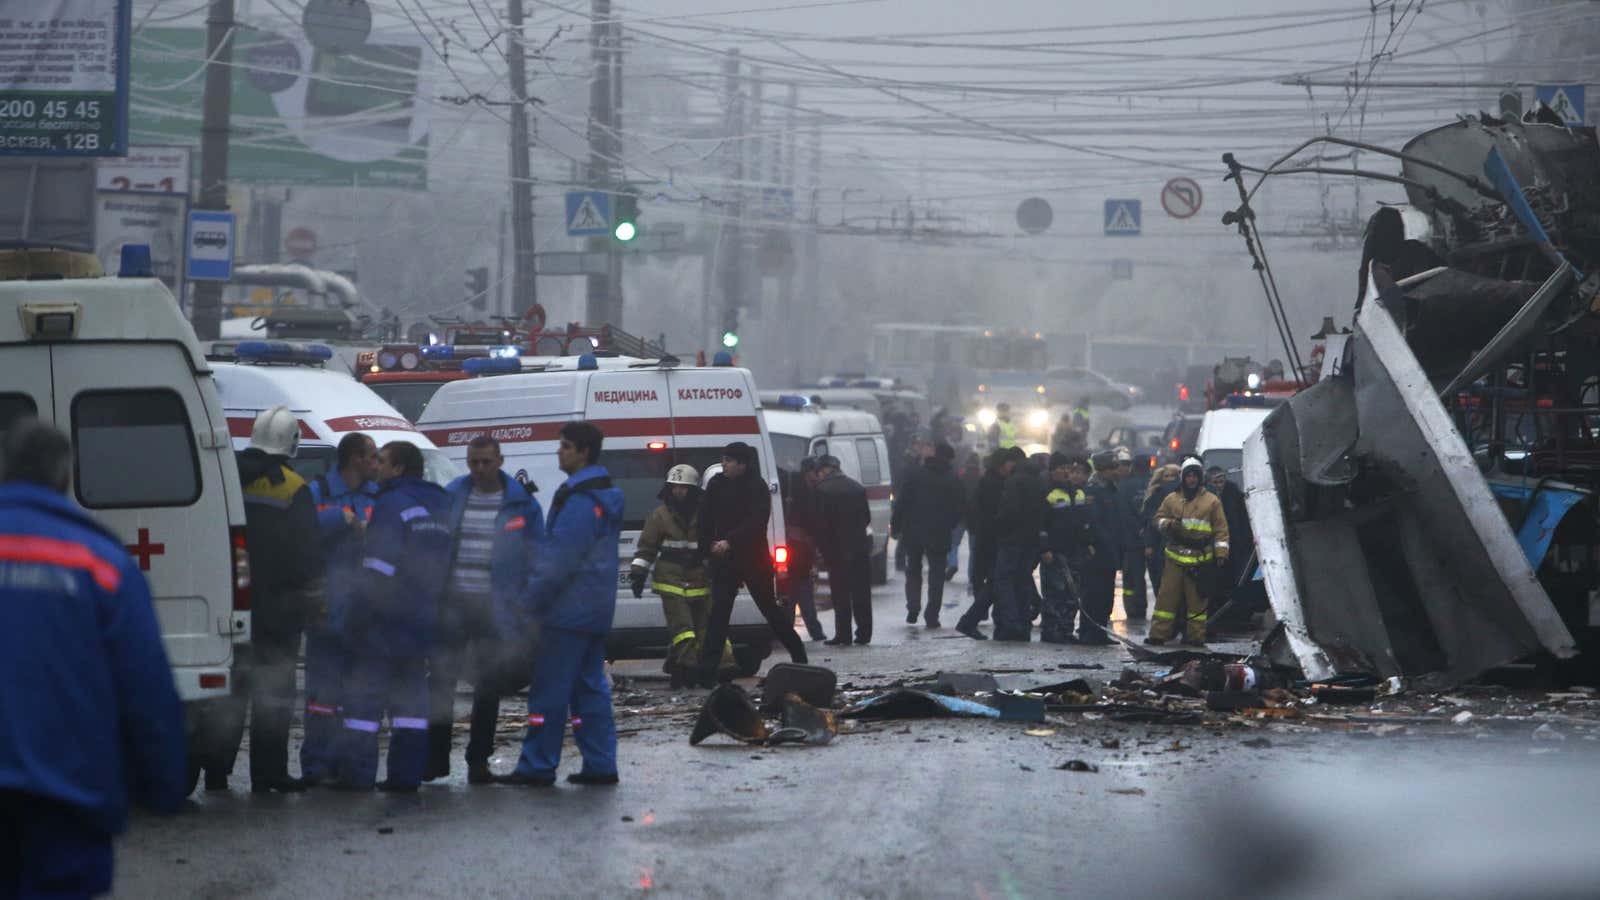 Experts, firefighters and police officers examine a site of a trolleybus explosion in Volgograd, Russia on Dec. 30.